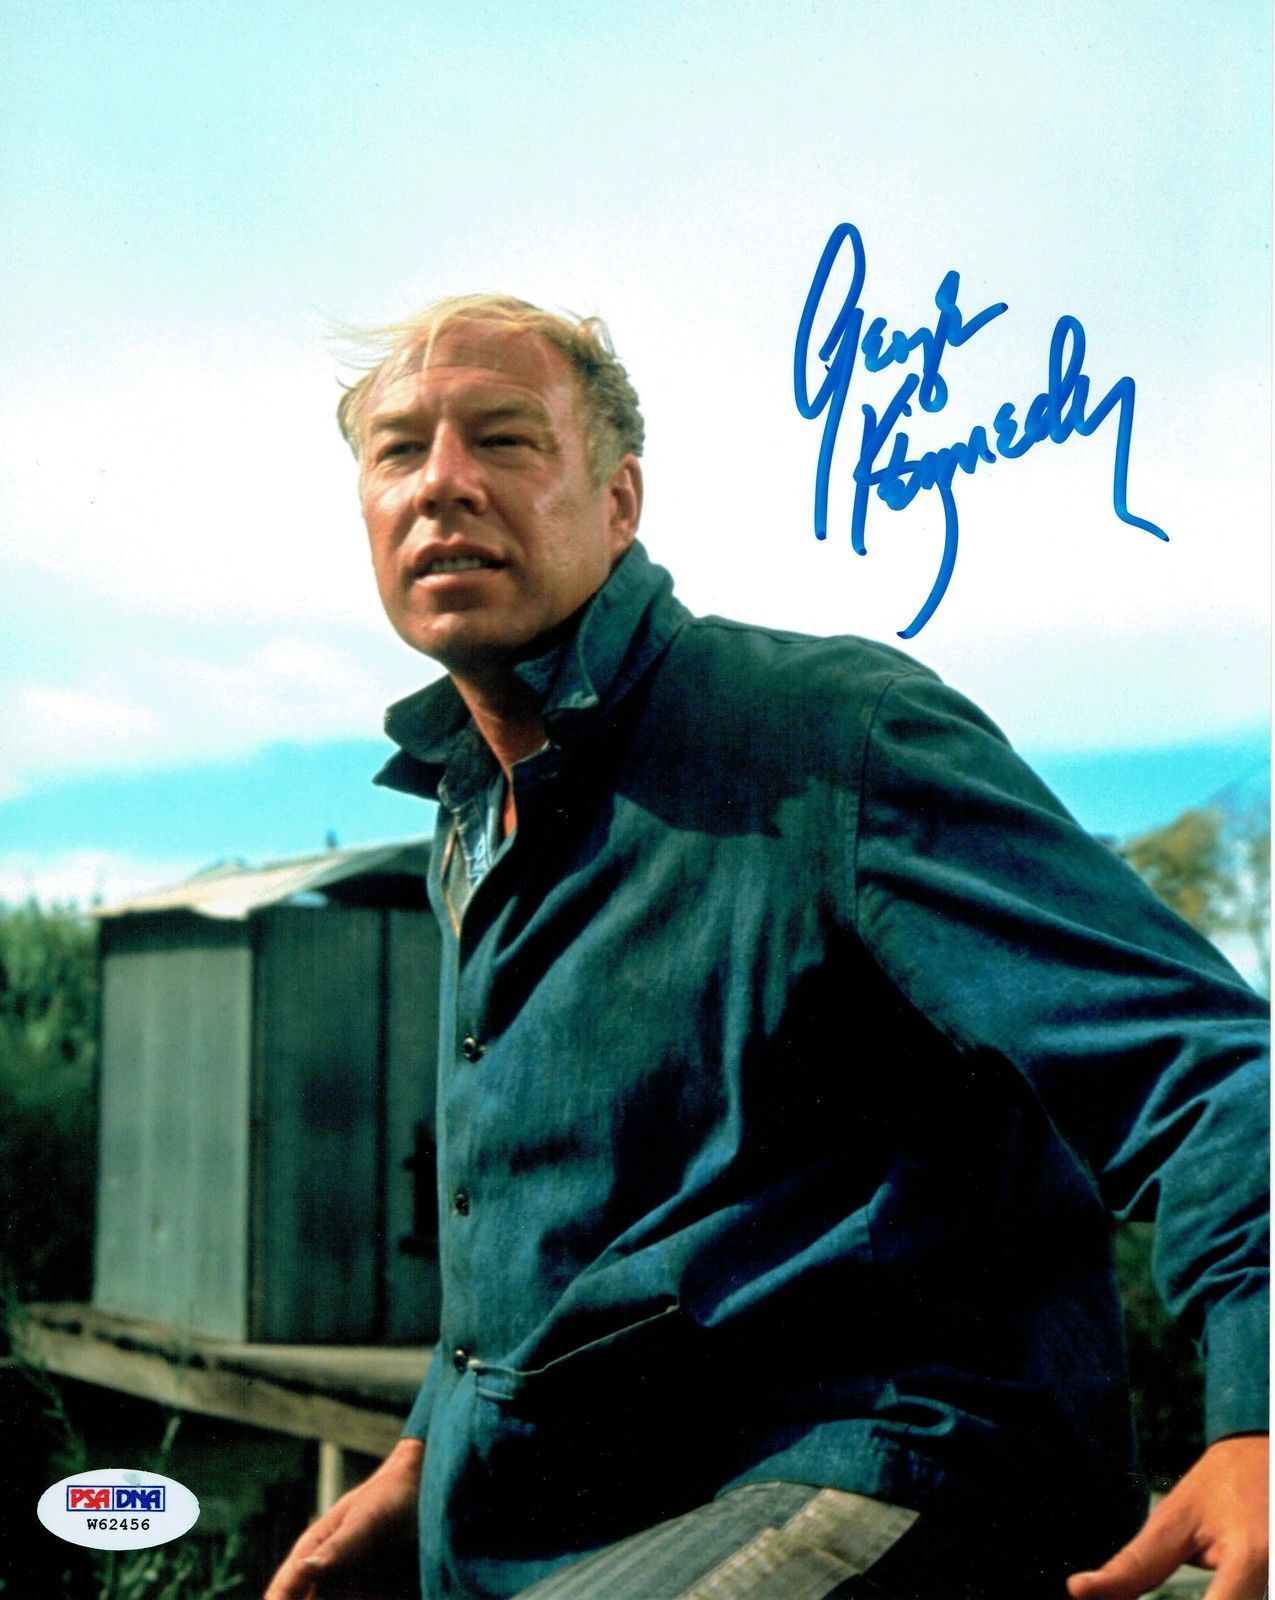 George Kennedy Signed Authentic Autographed 8x10 Photo Poster painting PSA/DNA #1